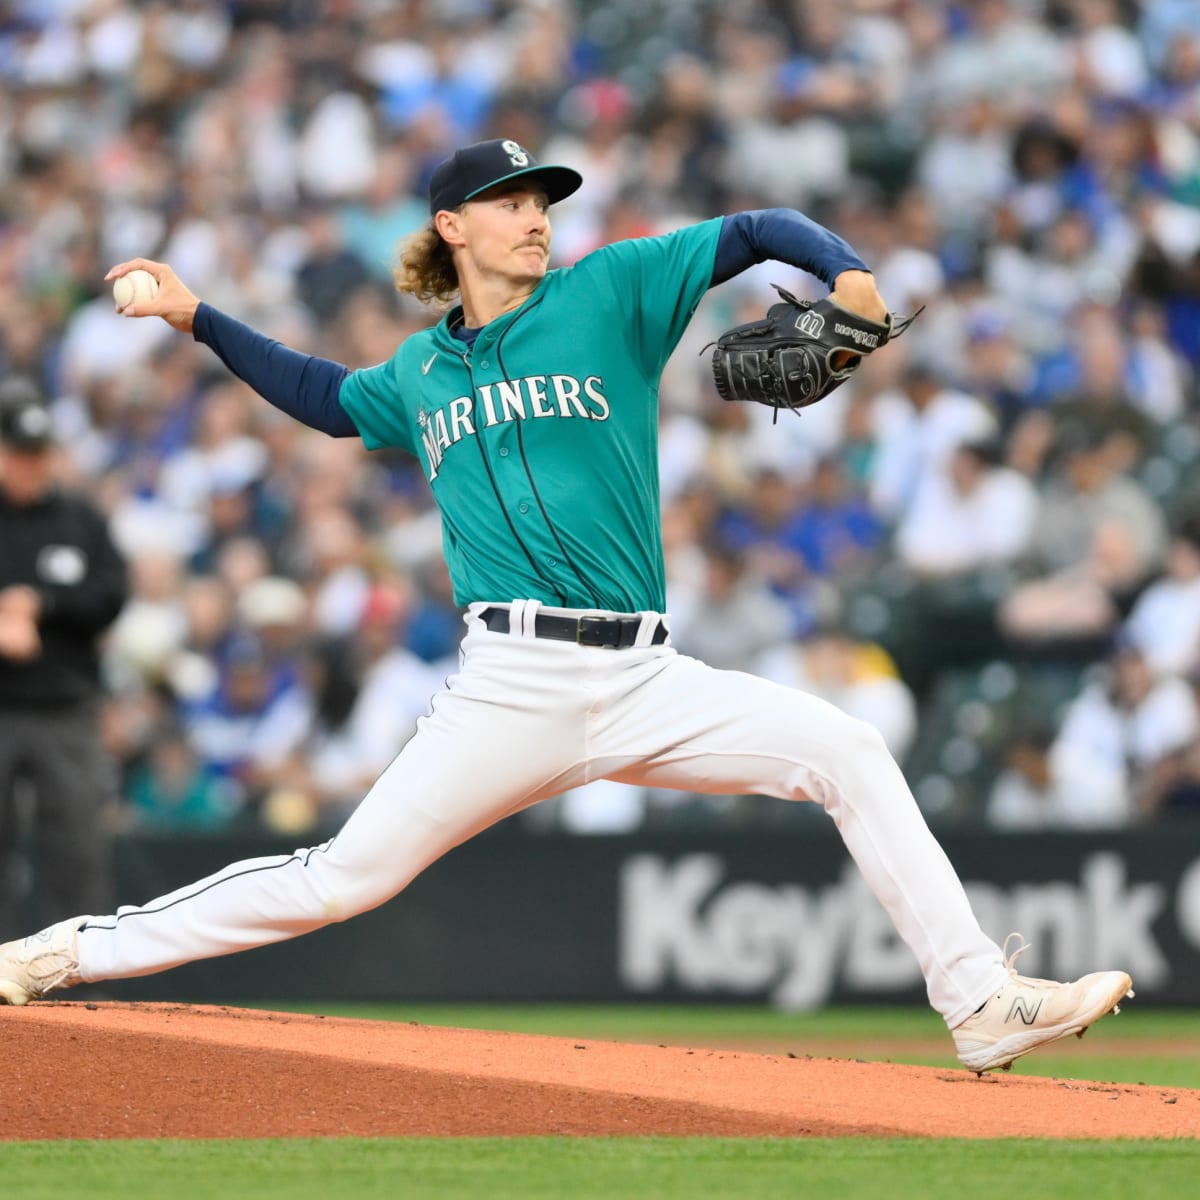 Seattle Mariners' Righty Gets Fans Excited as He Continues to Show